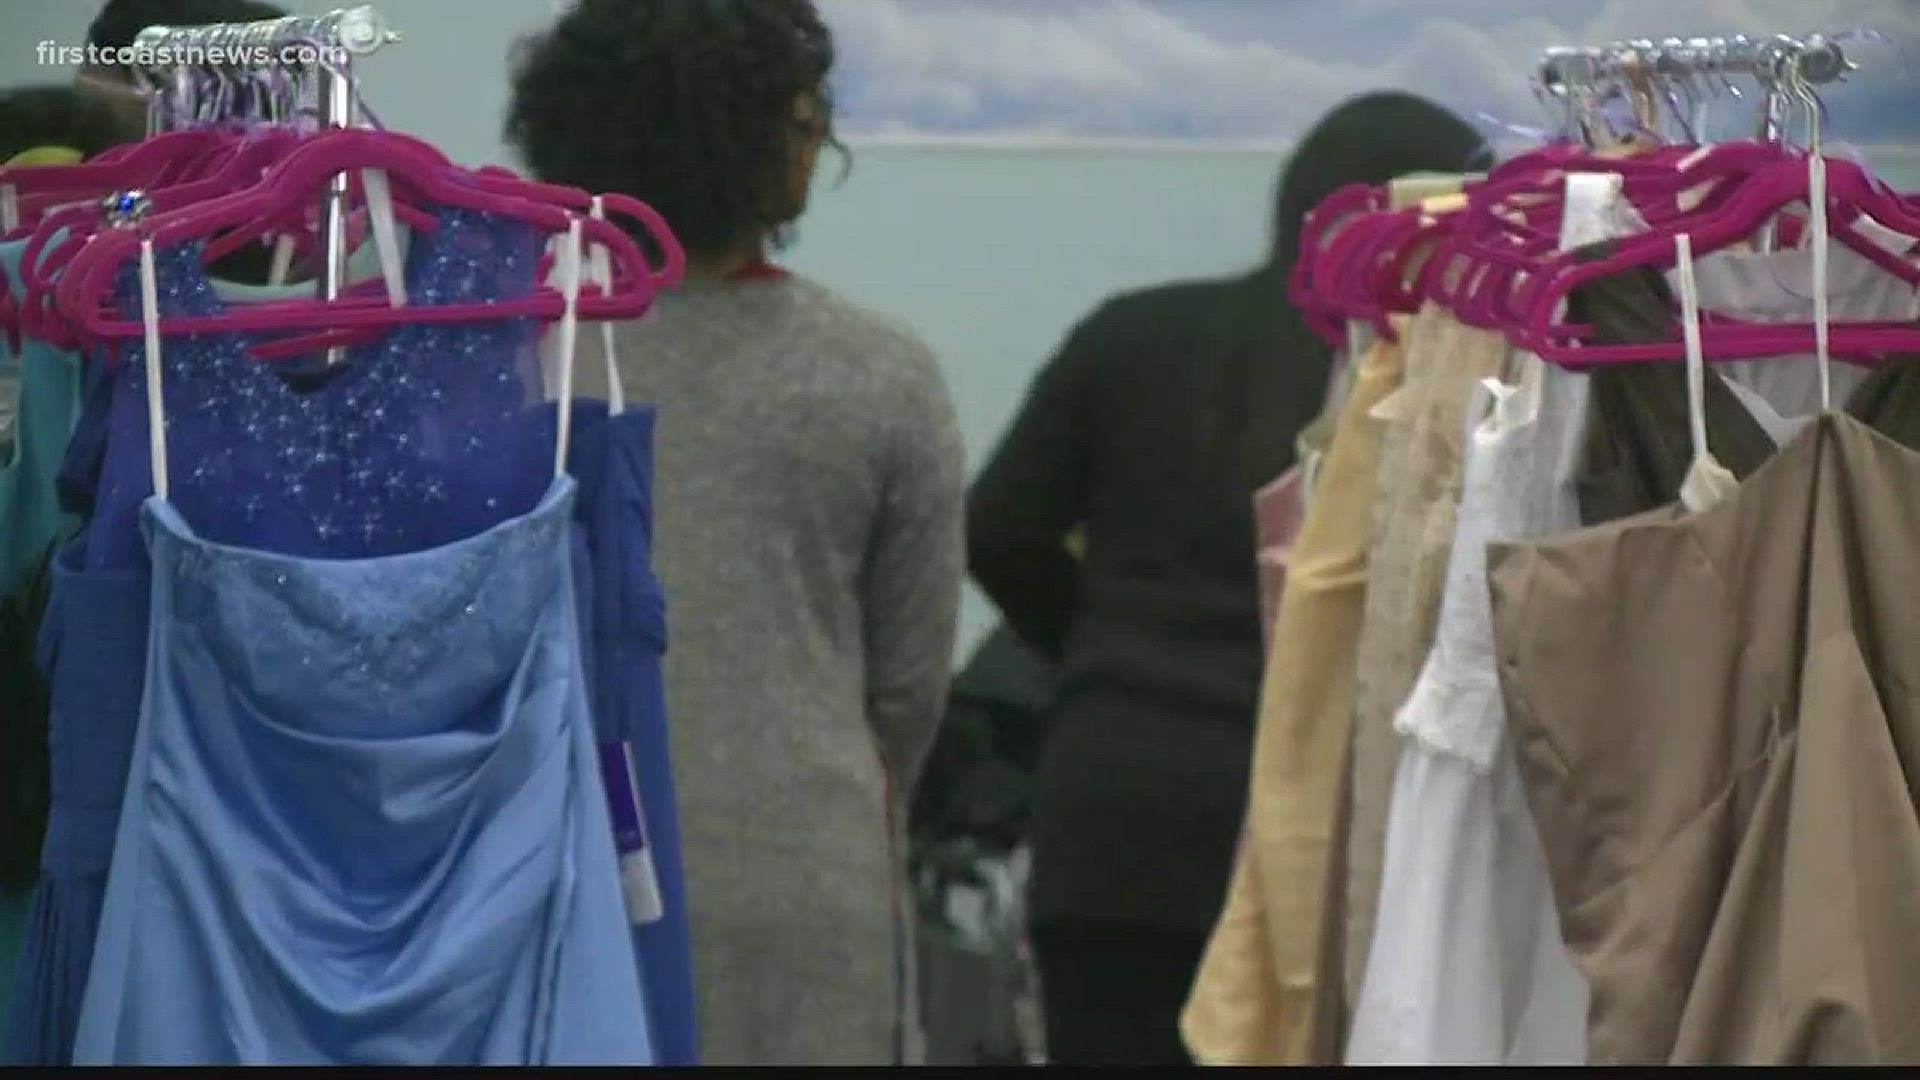 The group "Show Me Shoes" hosted their first ever Project Prom event at Sandlewood HS where more than 400 dresses and 125 shoes were donated from the Jacksonville community.